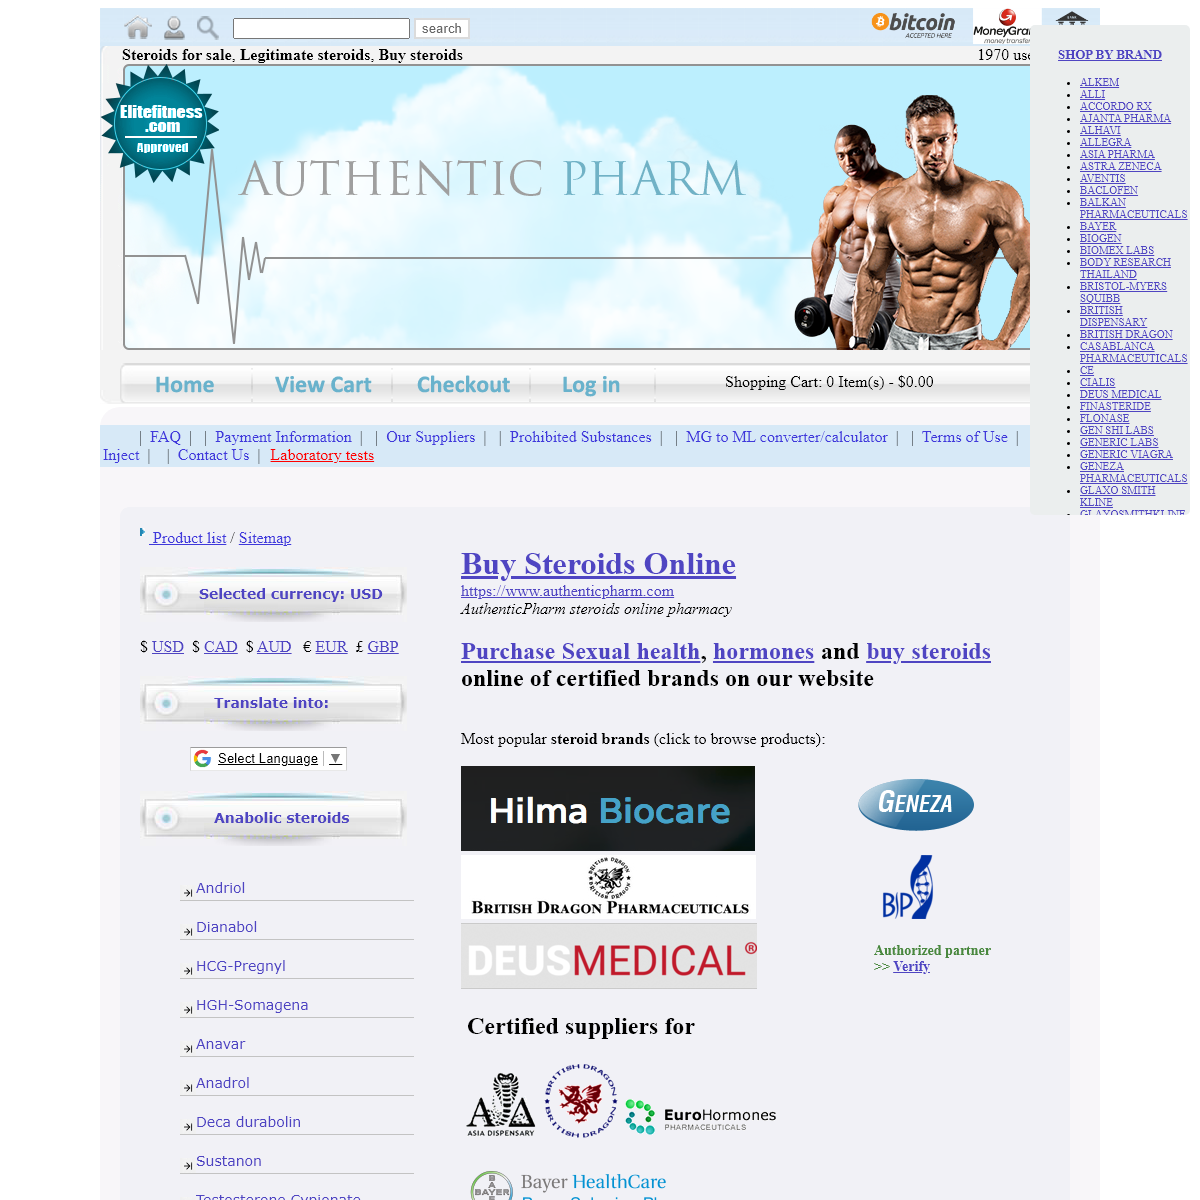 A complete backup of authenticpharm.com